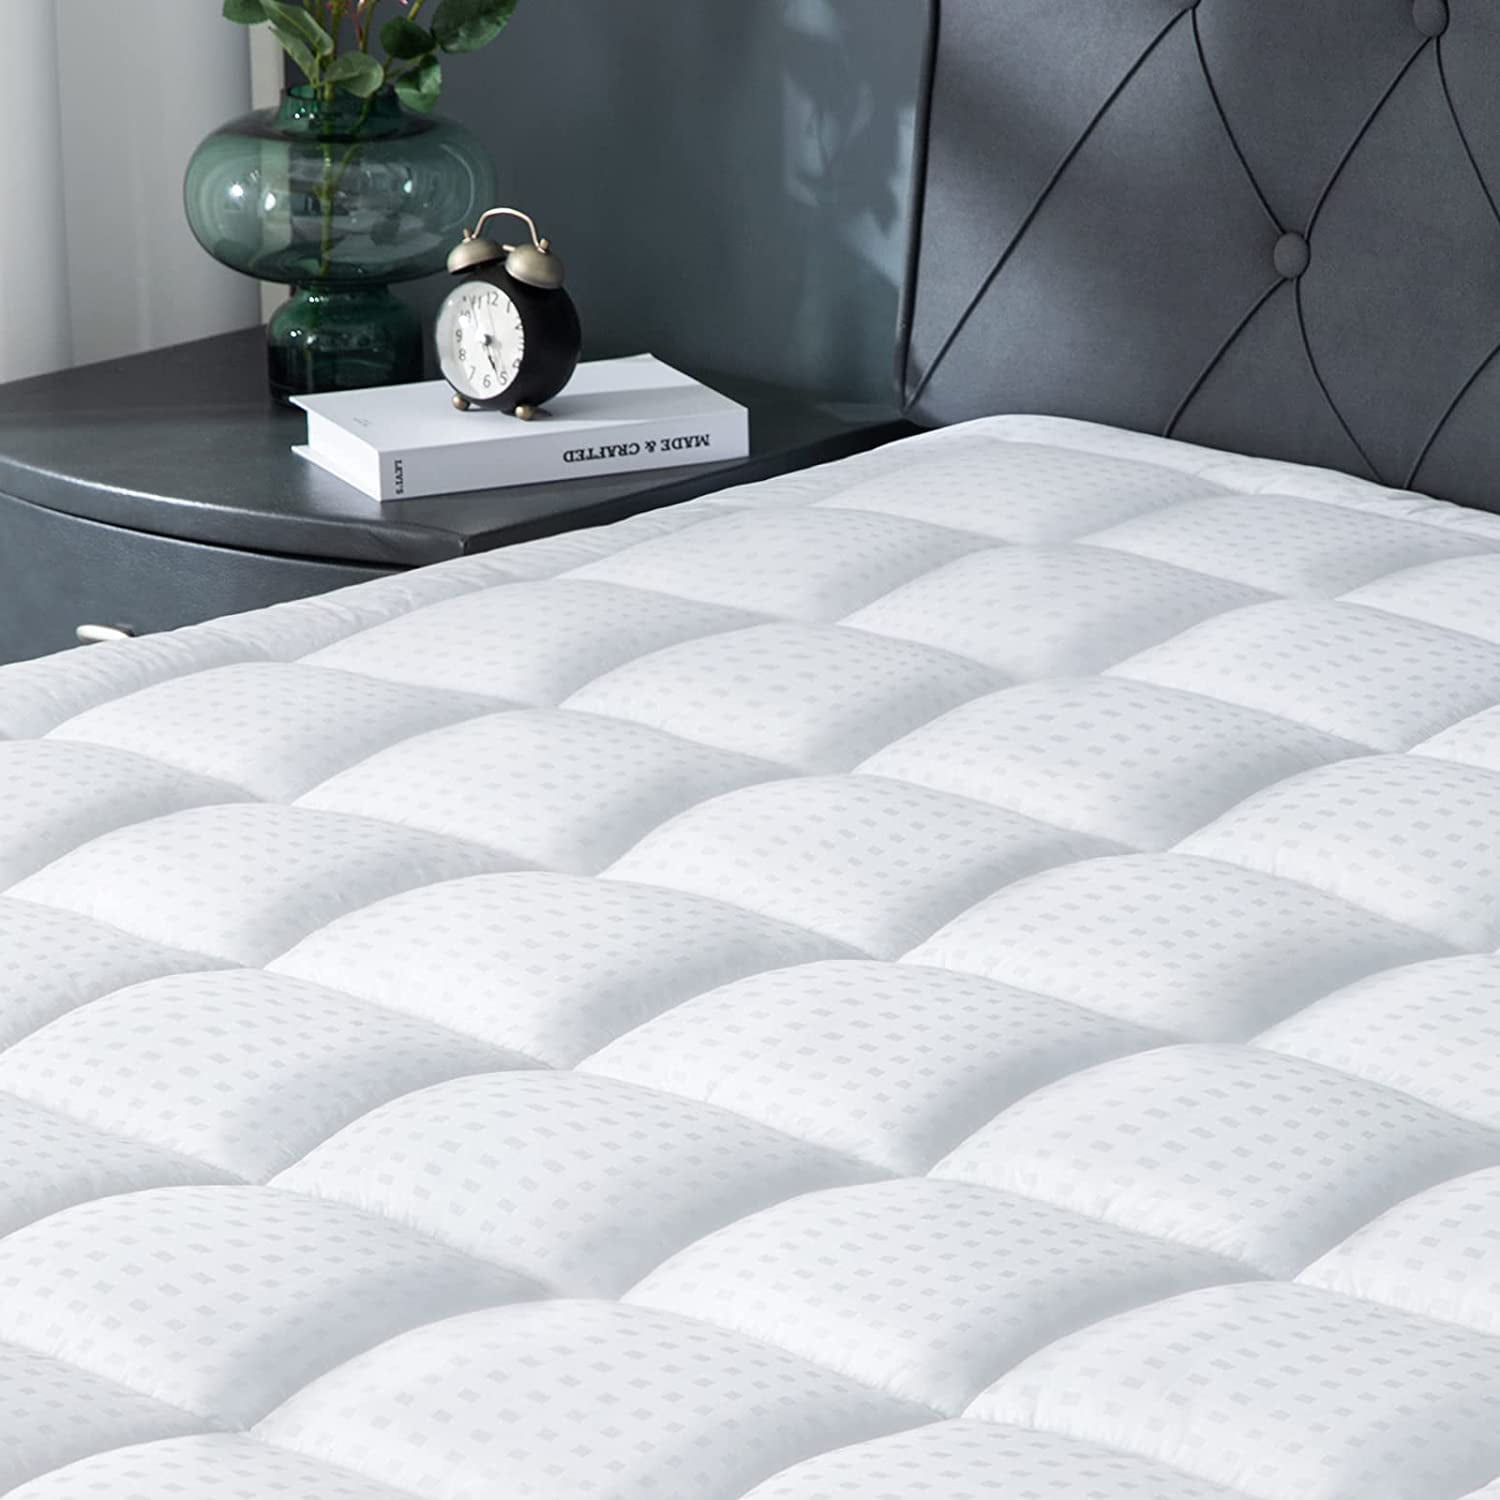 EXTRA DEEP QUILTED MATRESS PROTECTOR FITTED BED COVER Available in all Sizes 